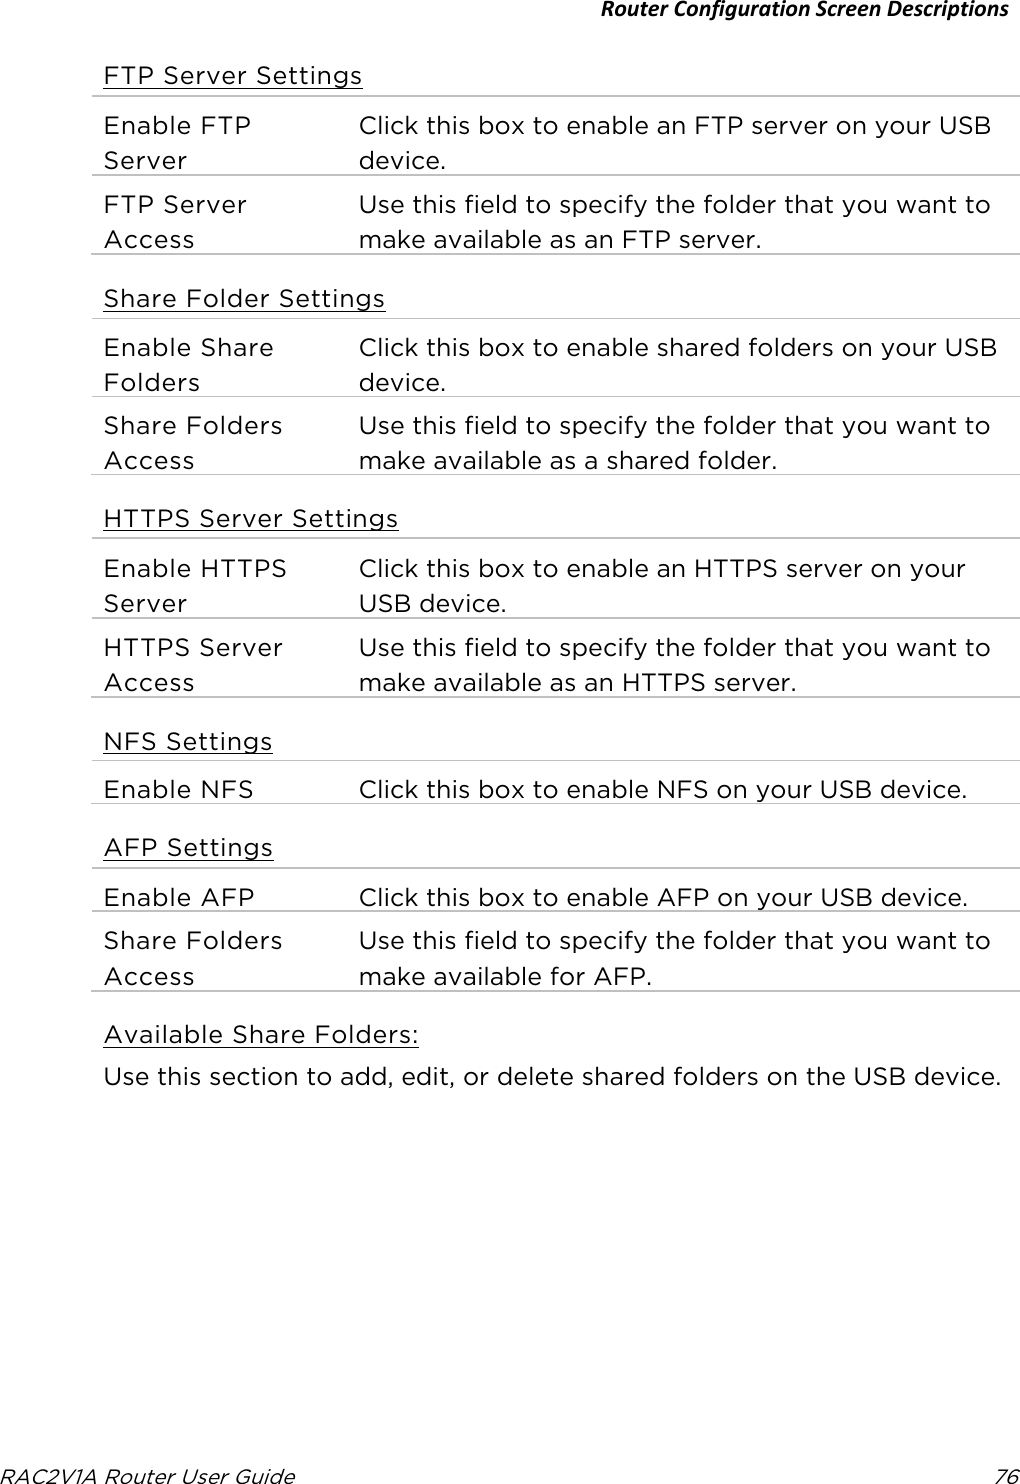 Router Configuration Screen Descriptions  RAC2V1A Router User Guide 76  FTP Server Settings Enable FTP Server Click this box to enable an FTP server on your USB device. FTP Server Access Use this field to specify the folder that you want to make available as an FTP server. Share Folder Settings Enable Share Folders Click this box to enable shared folders on your USB device. Share Folders Access Use this field to specify the folder that you want to make available as a shared folder. HTTPS Server Settings Enable HTTPS Server Click this box to enable an HTTPS server on your USB device. HTTPS Server Access Use this field to specify the folder that you want to make available as an HTTPS server. NFS Settings Enable NFS Click this box to enable NFS on your USB device. AFP Settings Enable AFP Click this box to enable AFP on your USB device. Share Folders Access Use this field to specify the folder that you want to make available for AFP. Available Share Folders: Use this section to add, edit, or delete shared folders on the USB device.   